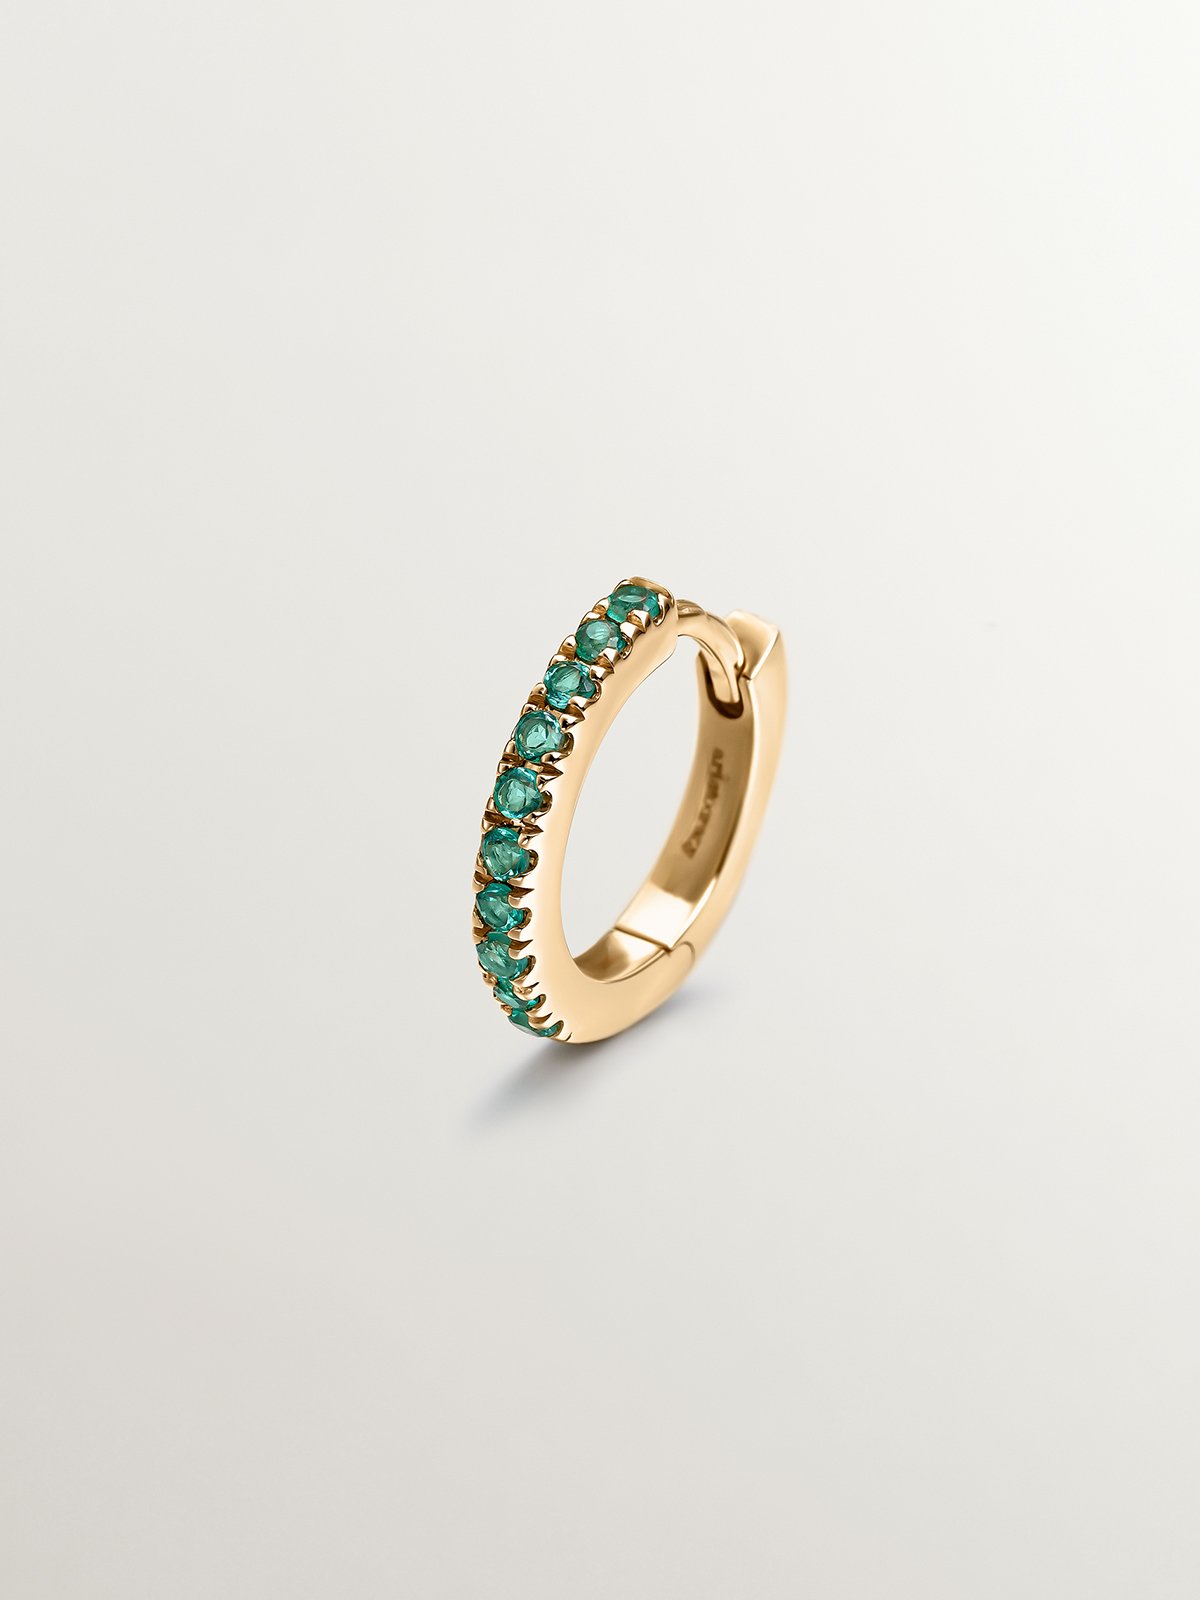 Small individual 9k yellow gold hoop earring with emeralds.